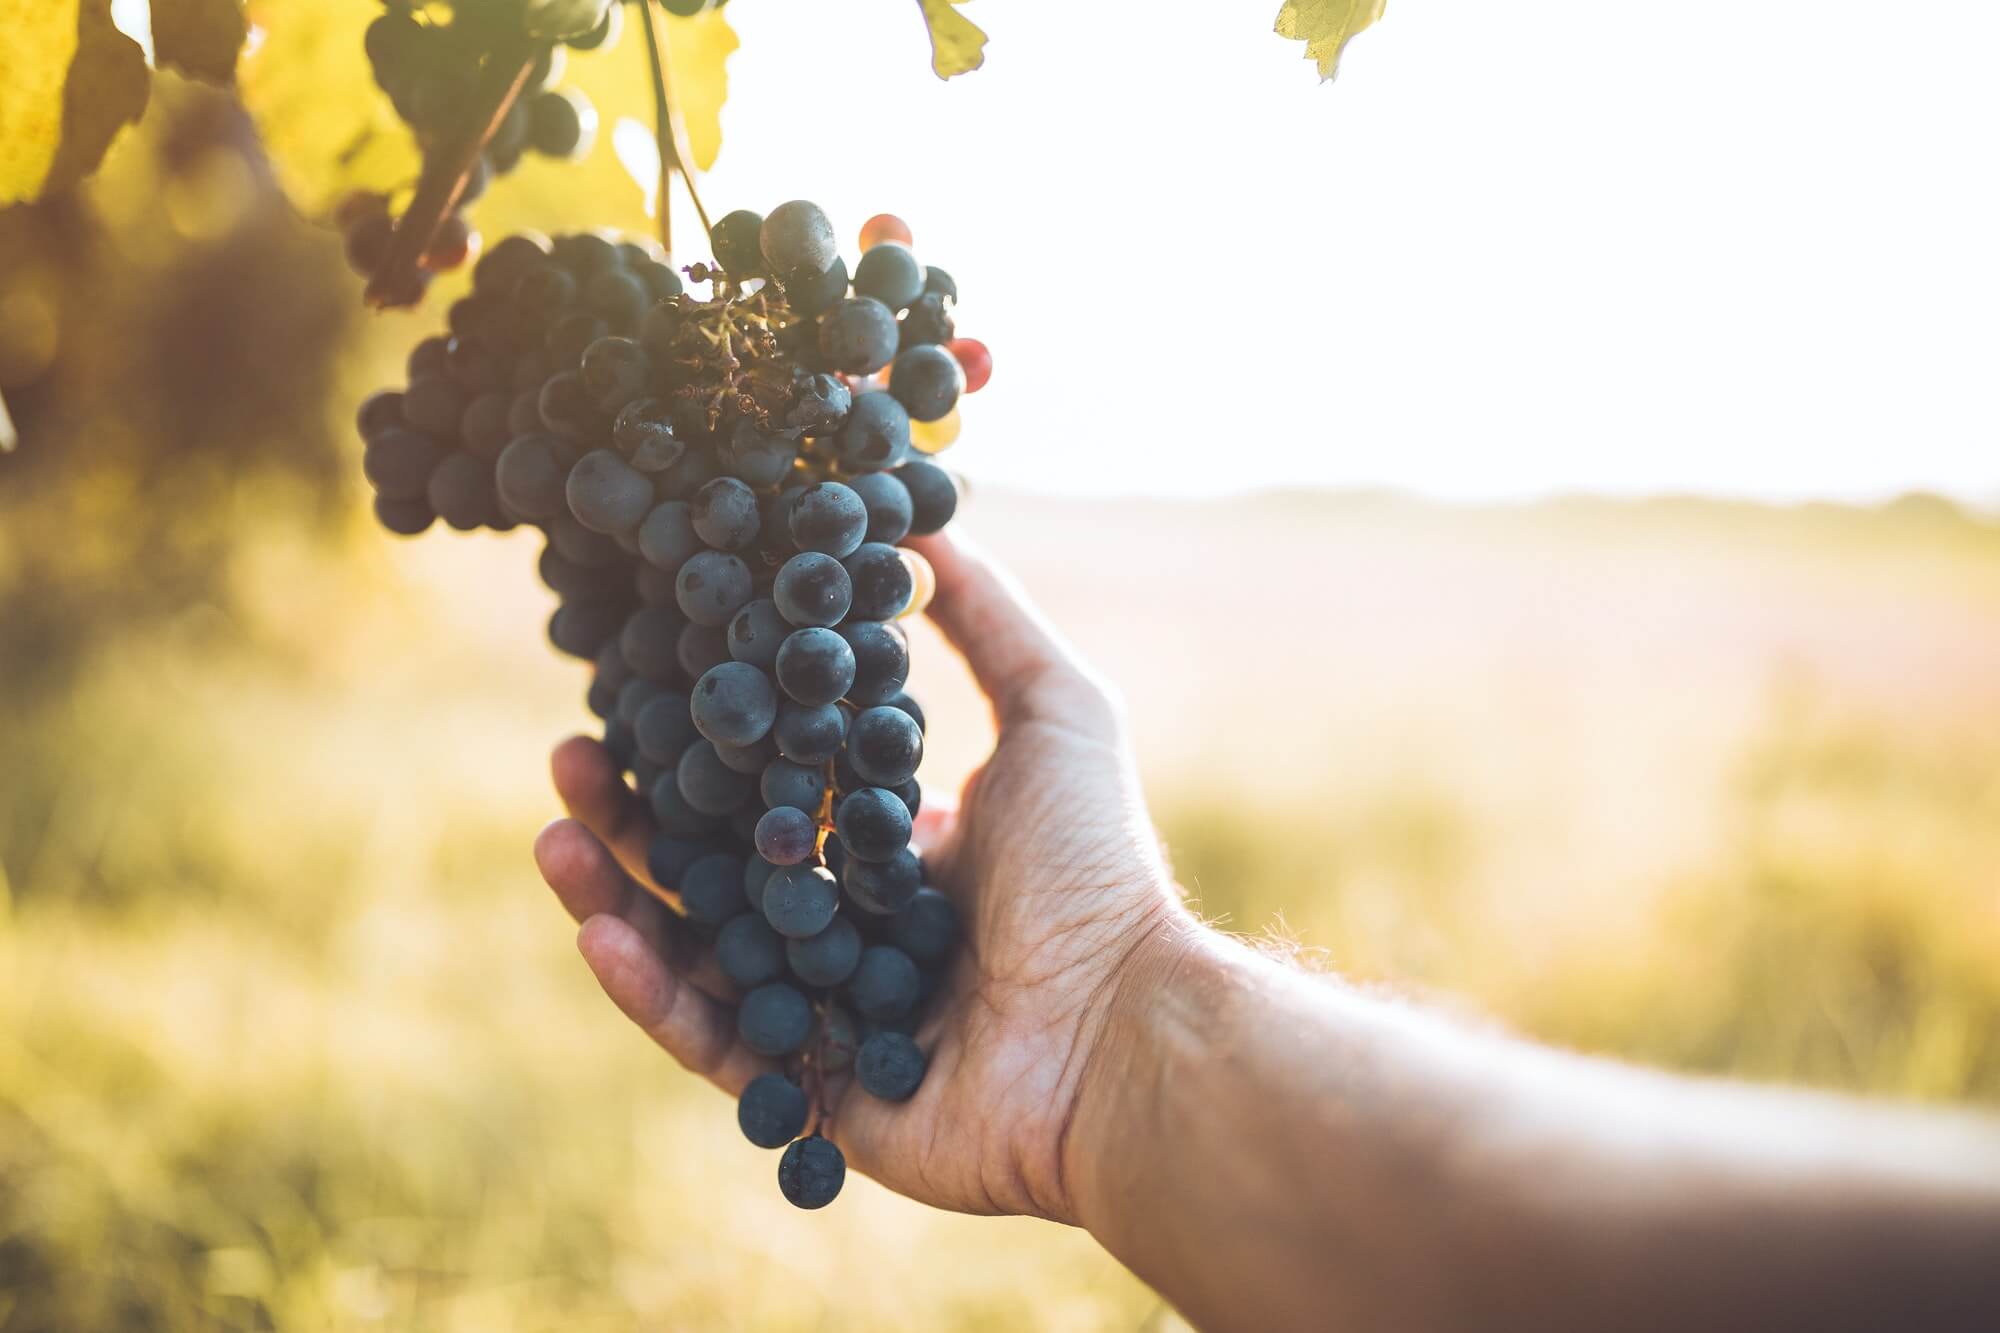 Hand touches the grapes for the harvest